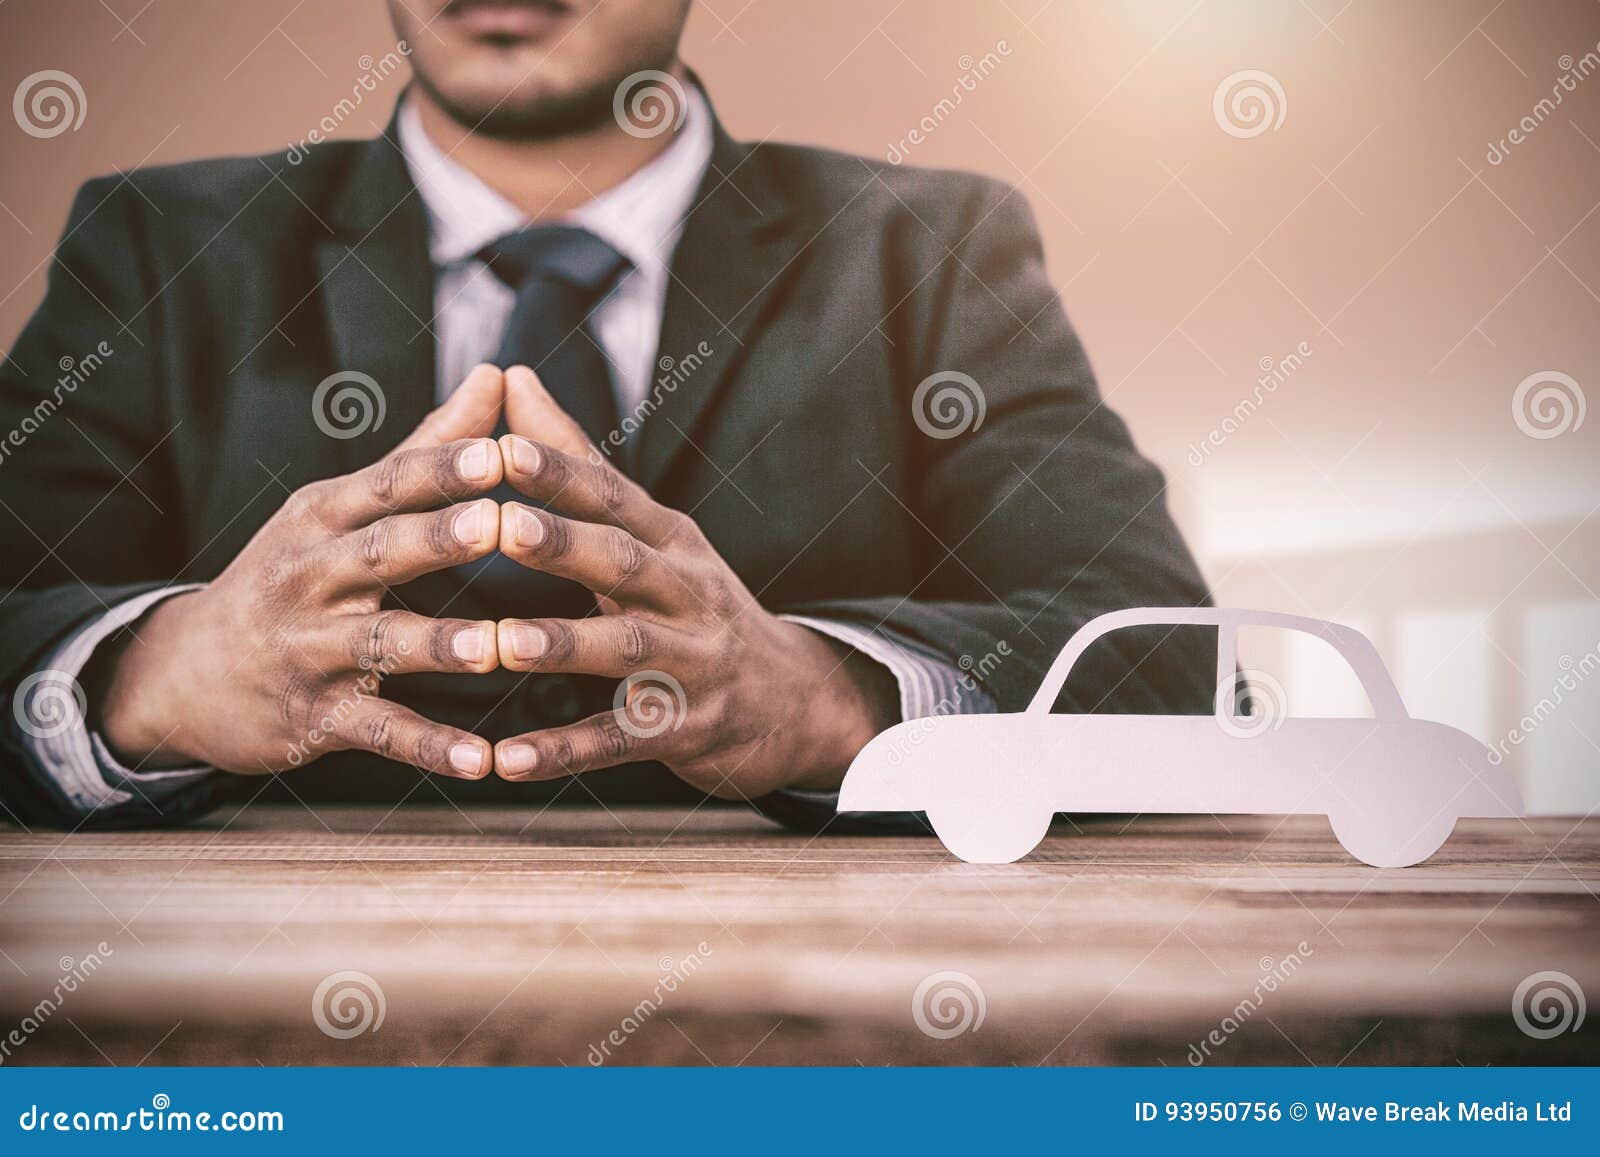 Composite Image Of Business Man Sitting Behind A Desk Stock Photo